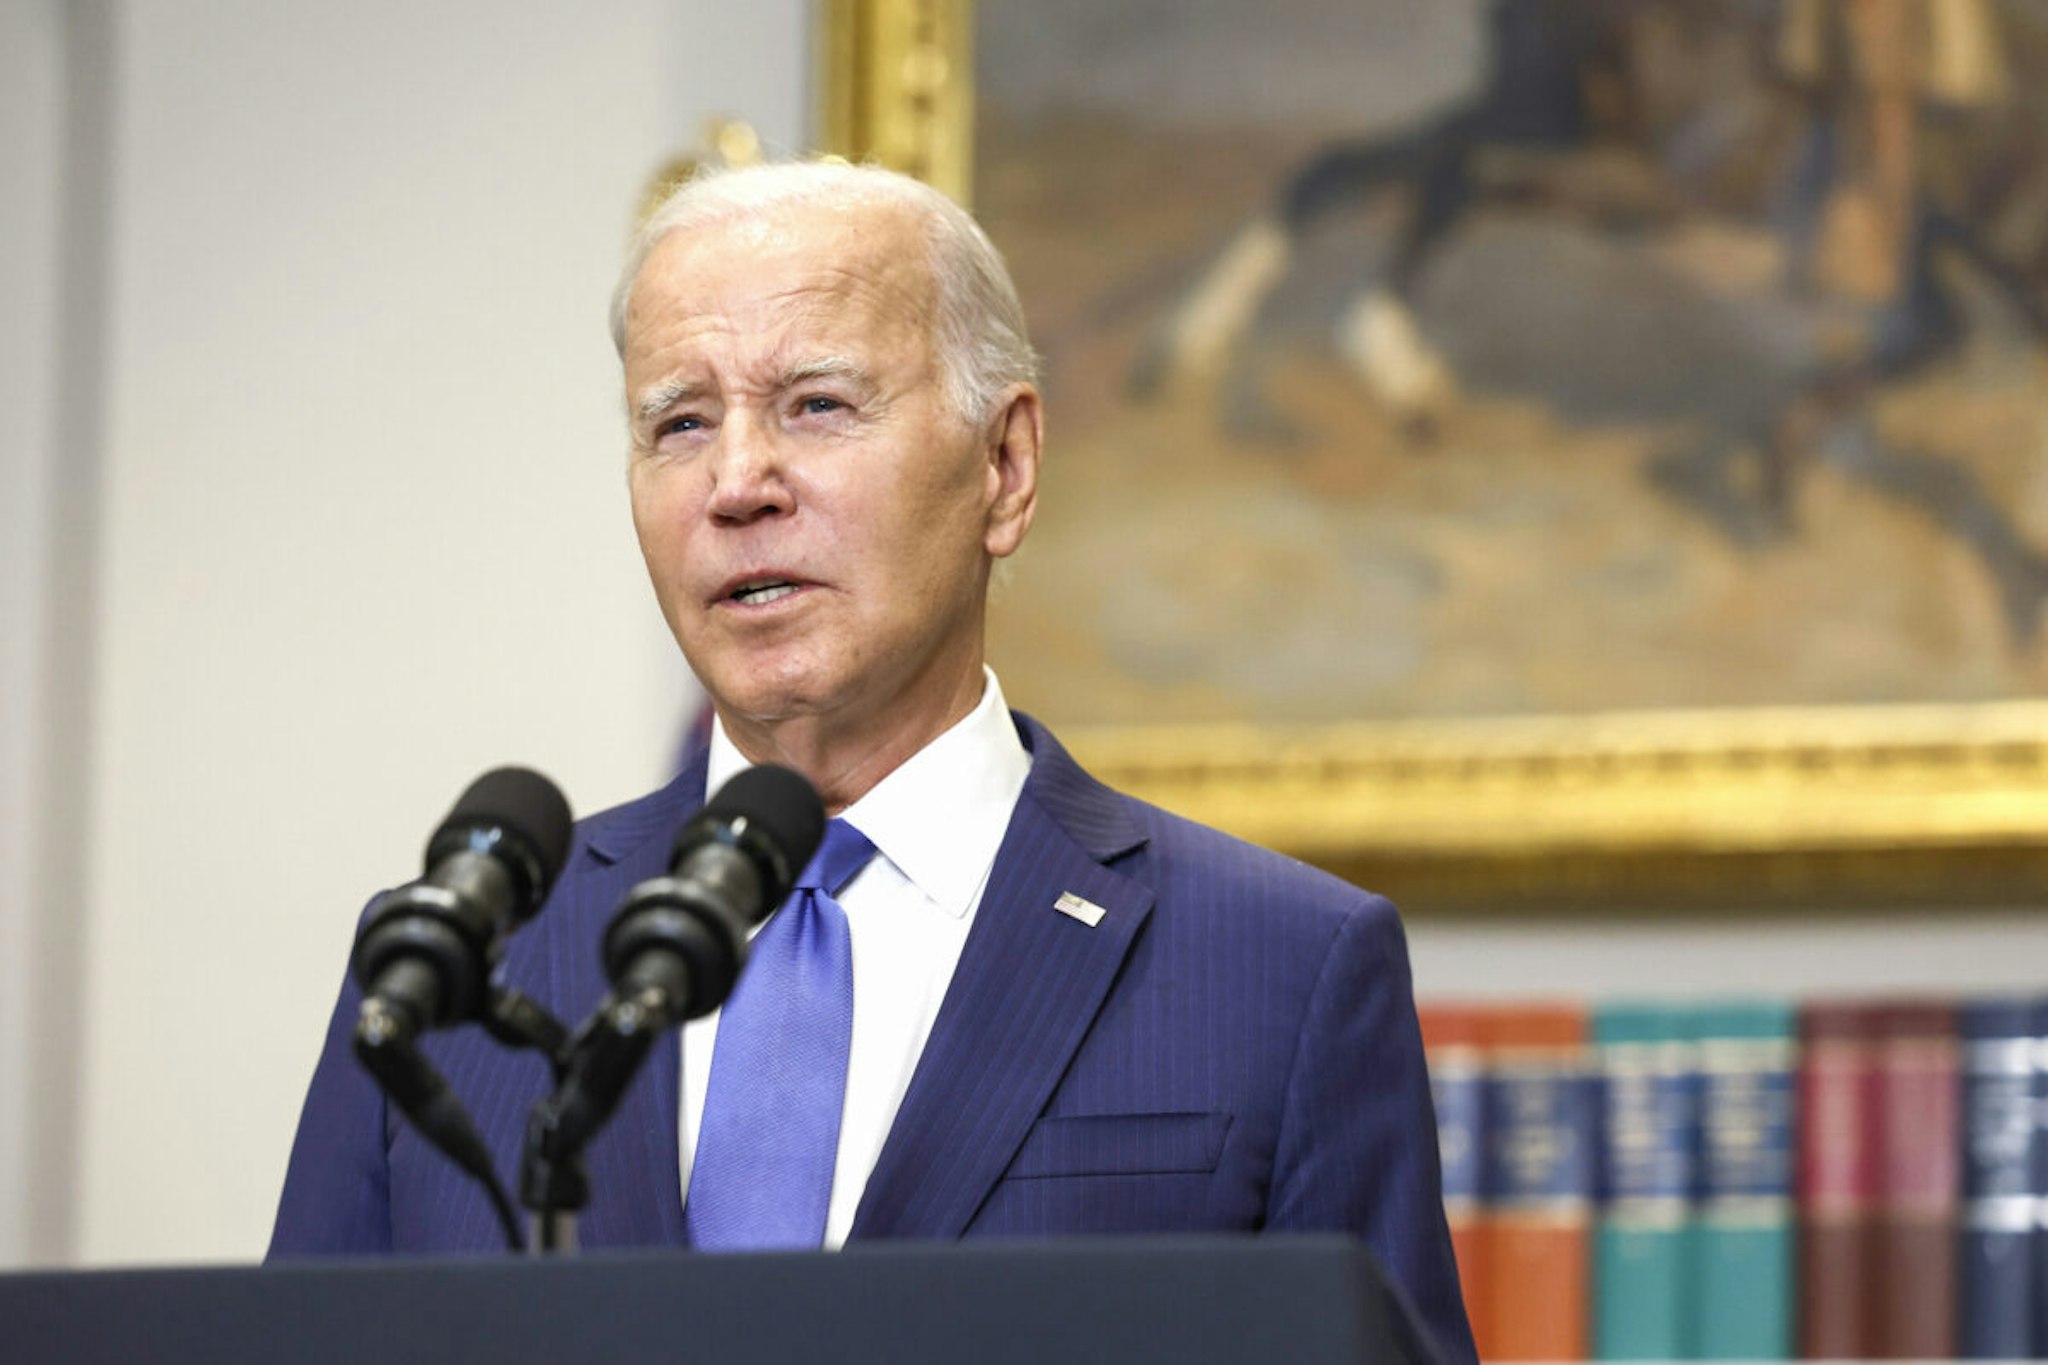 U.S. President Joe Biden gives remarks on Artificial Intelligence in the Roosevelt Room at the White House on July 21, 2023 in Washington, DC.